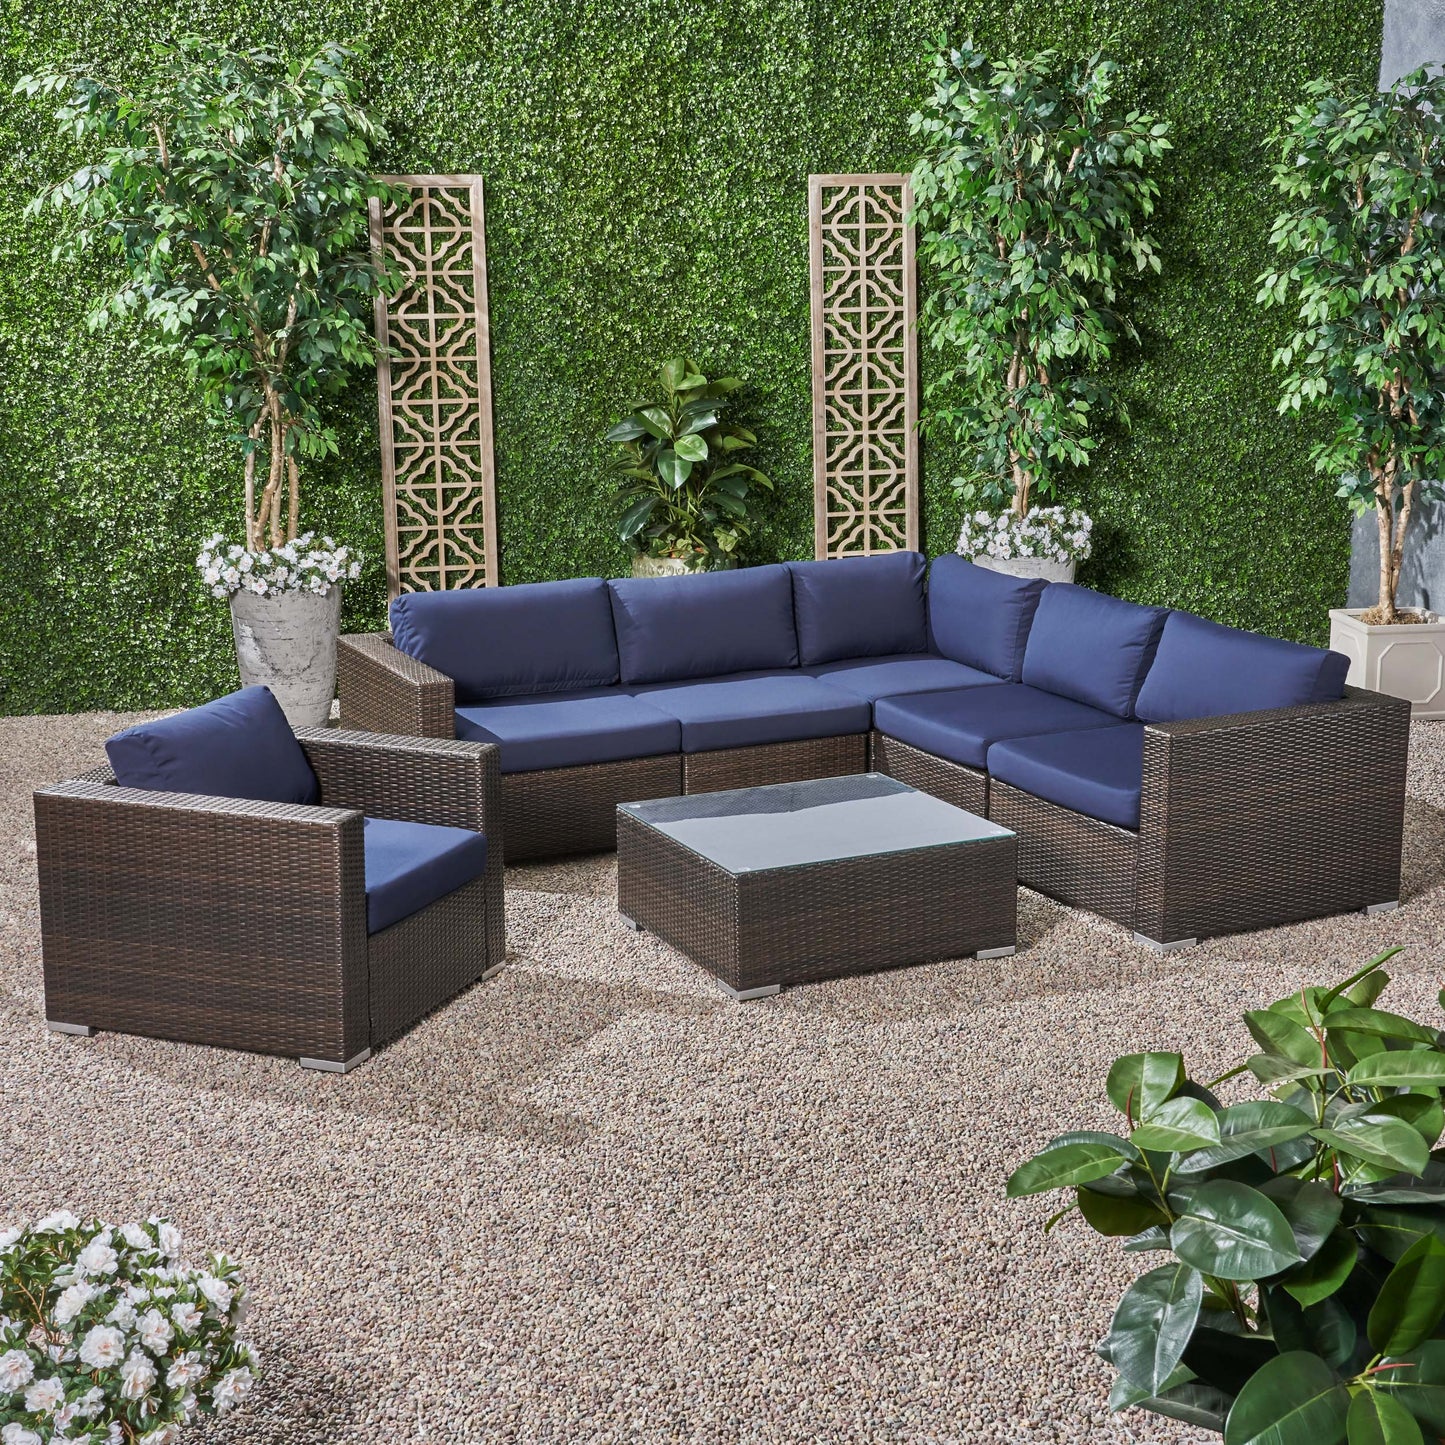 Kyra Outdoor 6 Seater Wicker Sectional Sofa Set with Sunbrella Cushions